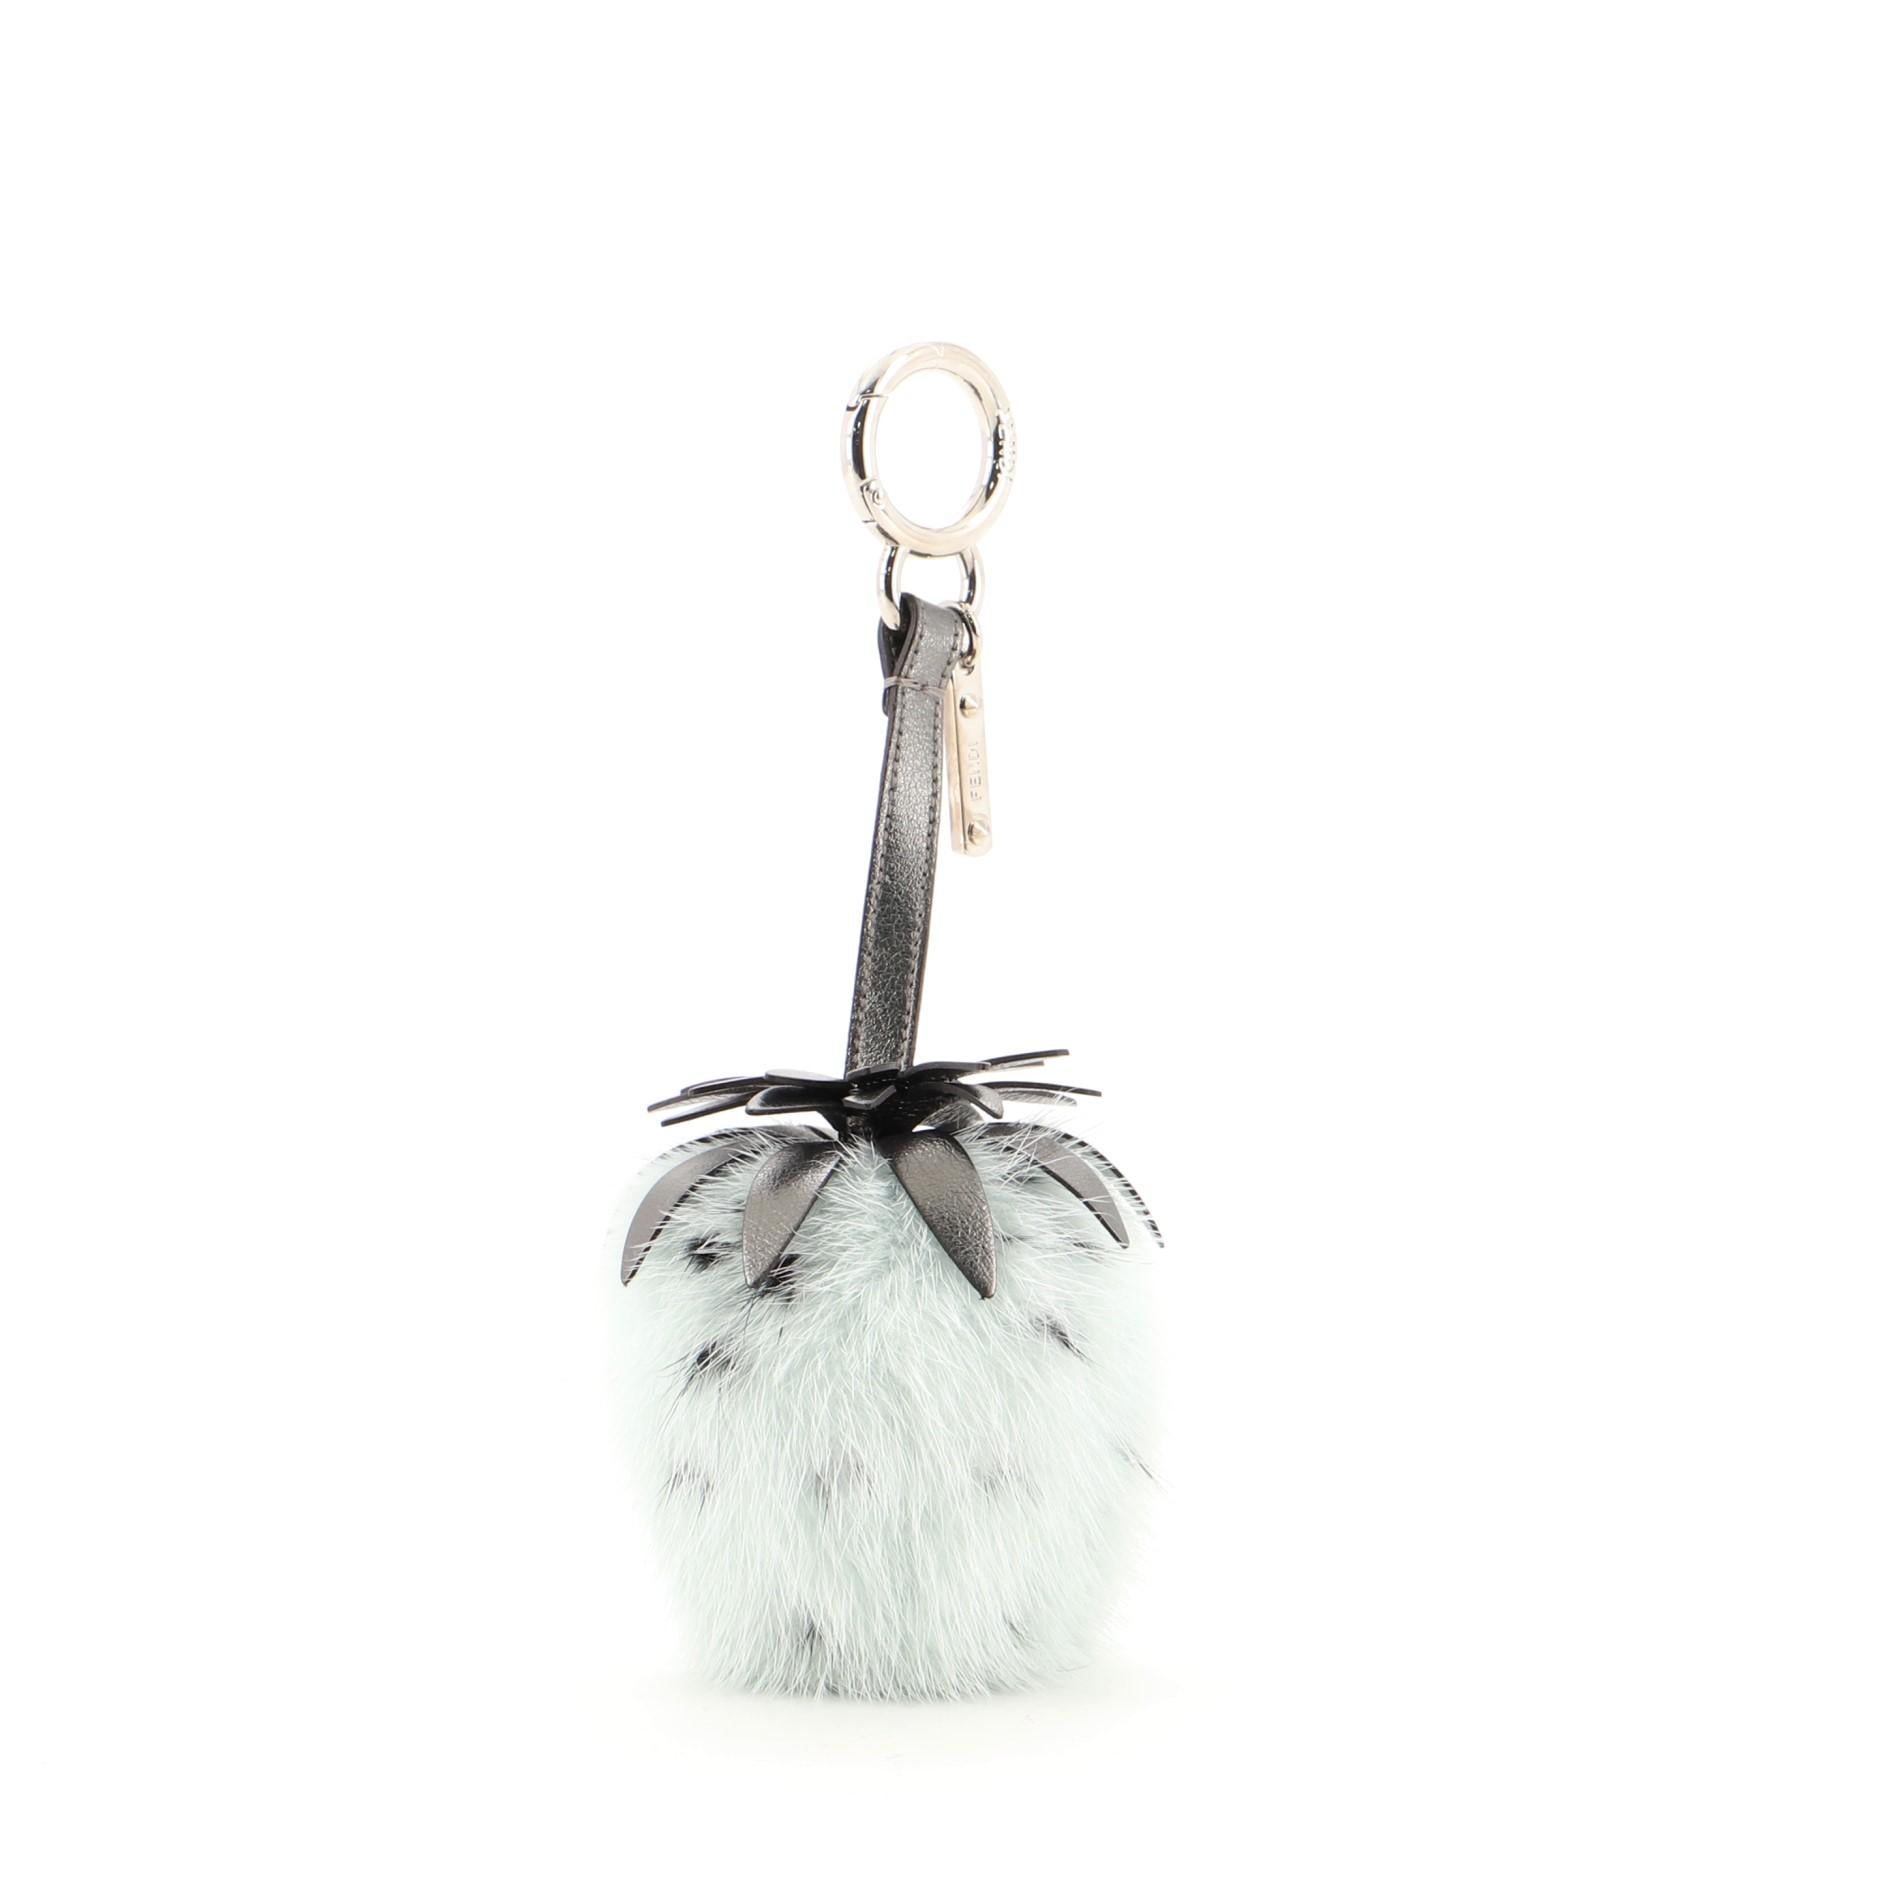 Fendi Fruit Bag Charm Fur and Leather
Gray Green Fur Leather

Condition Details: Cracking on strap wax edge, scratches and tarnish on hardware.

51788MSC

Height 7